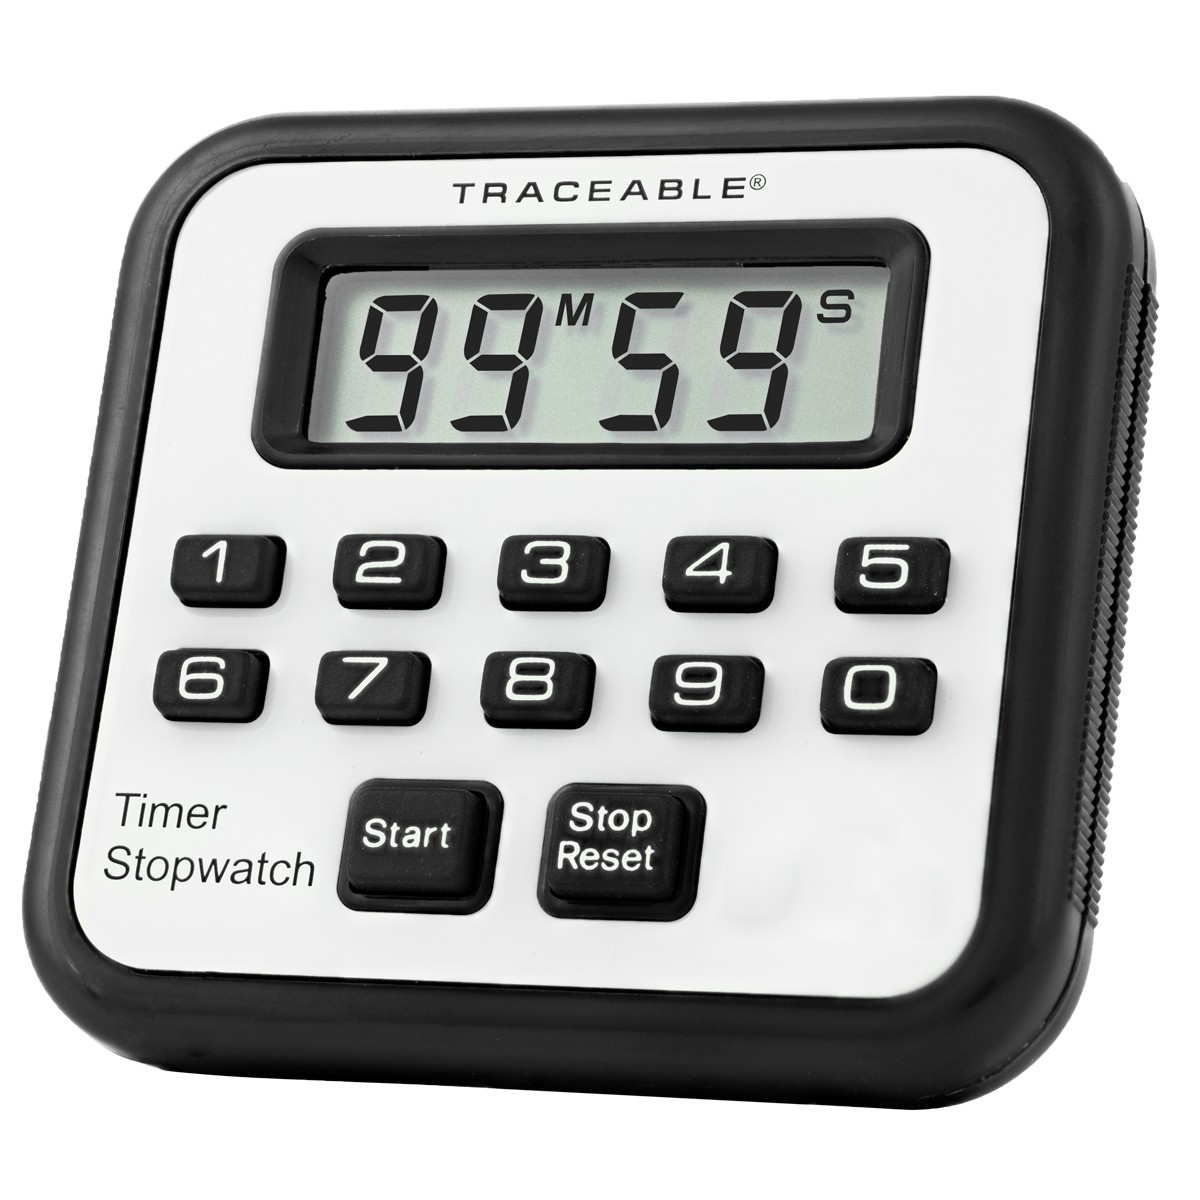 Alarm Traceable Timer/Stopwatch